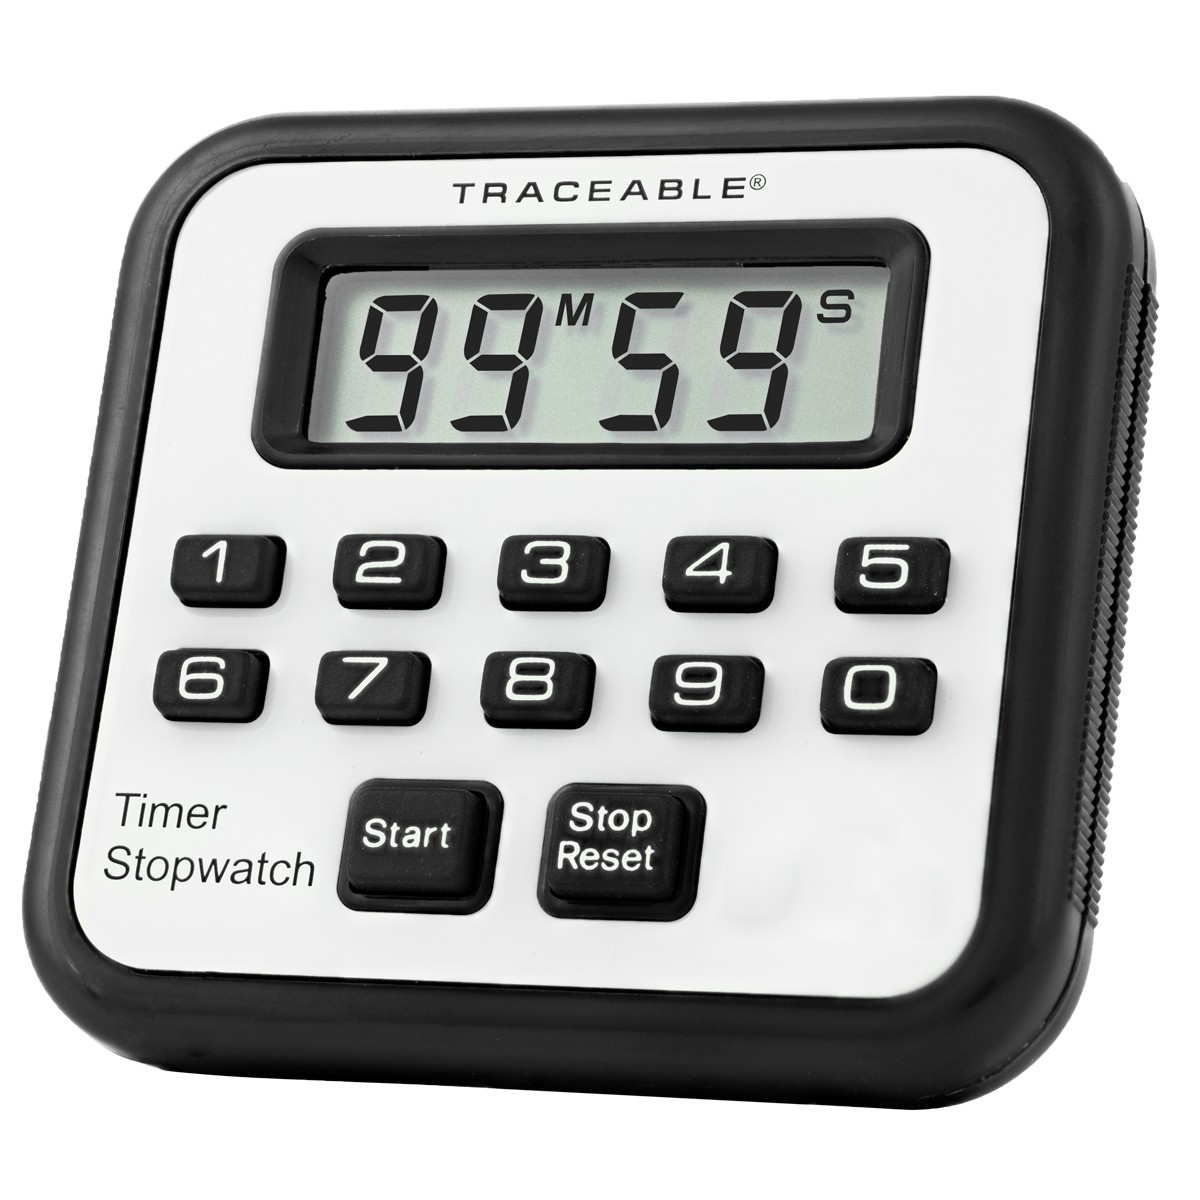 Alarm Traceable Timer/Stopwatch